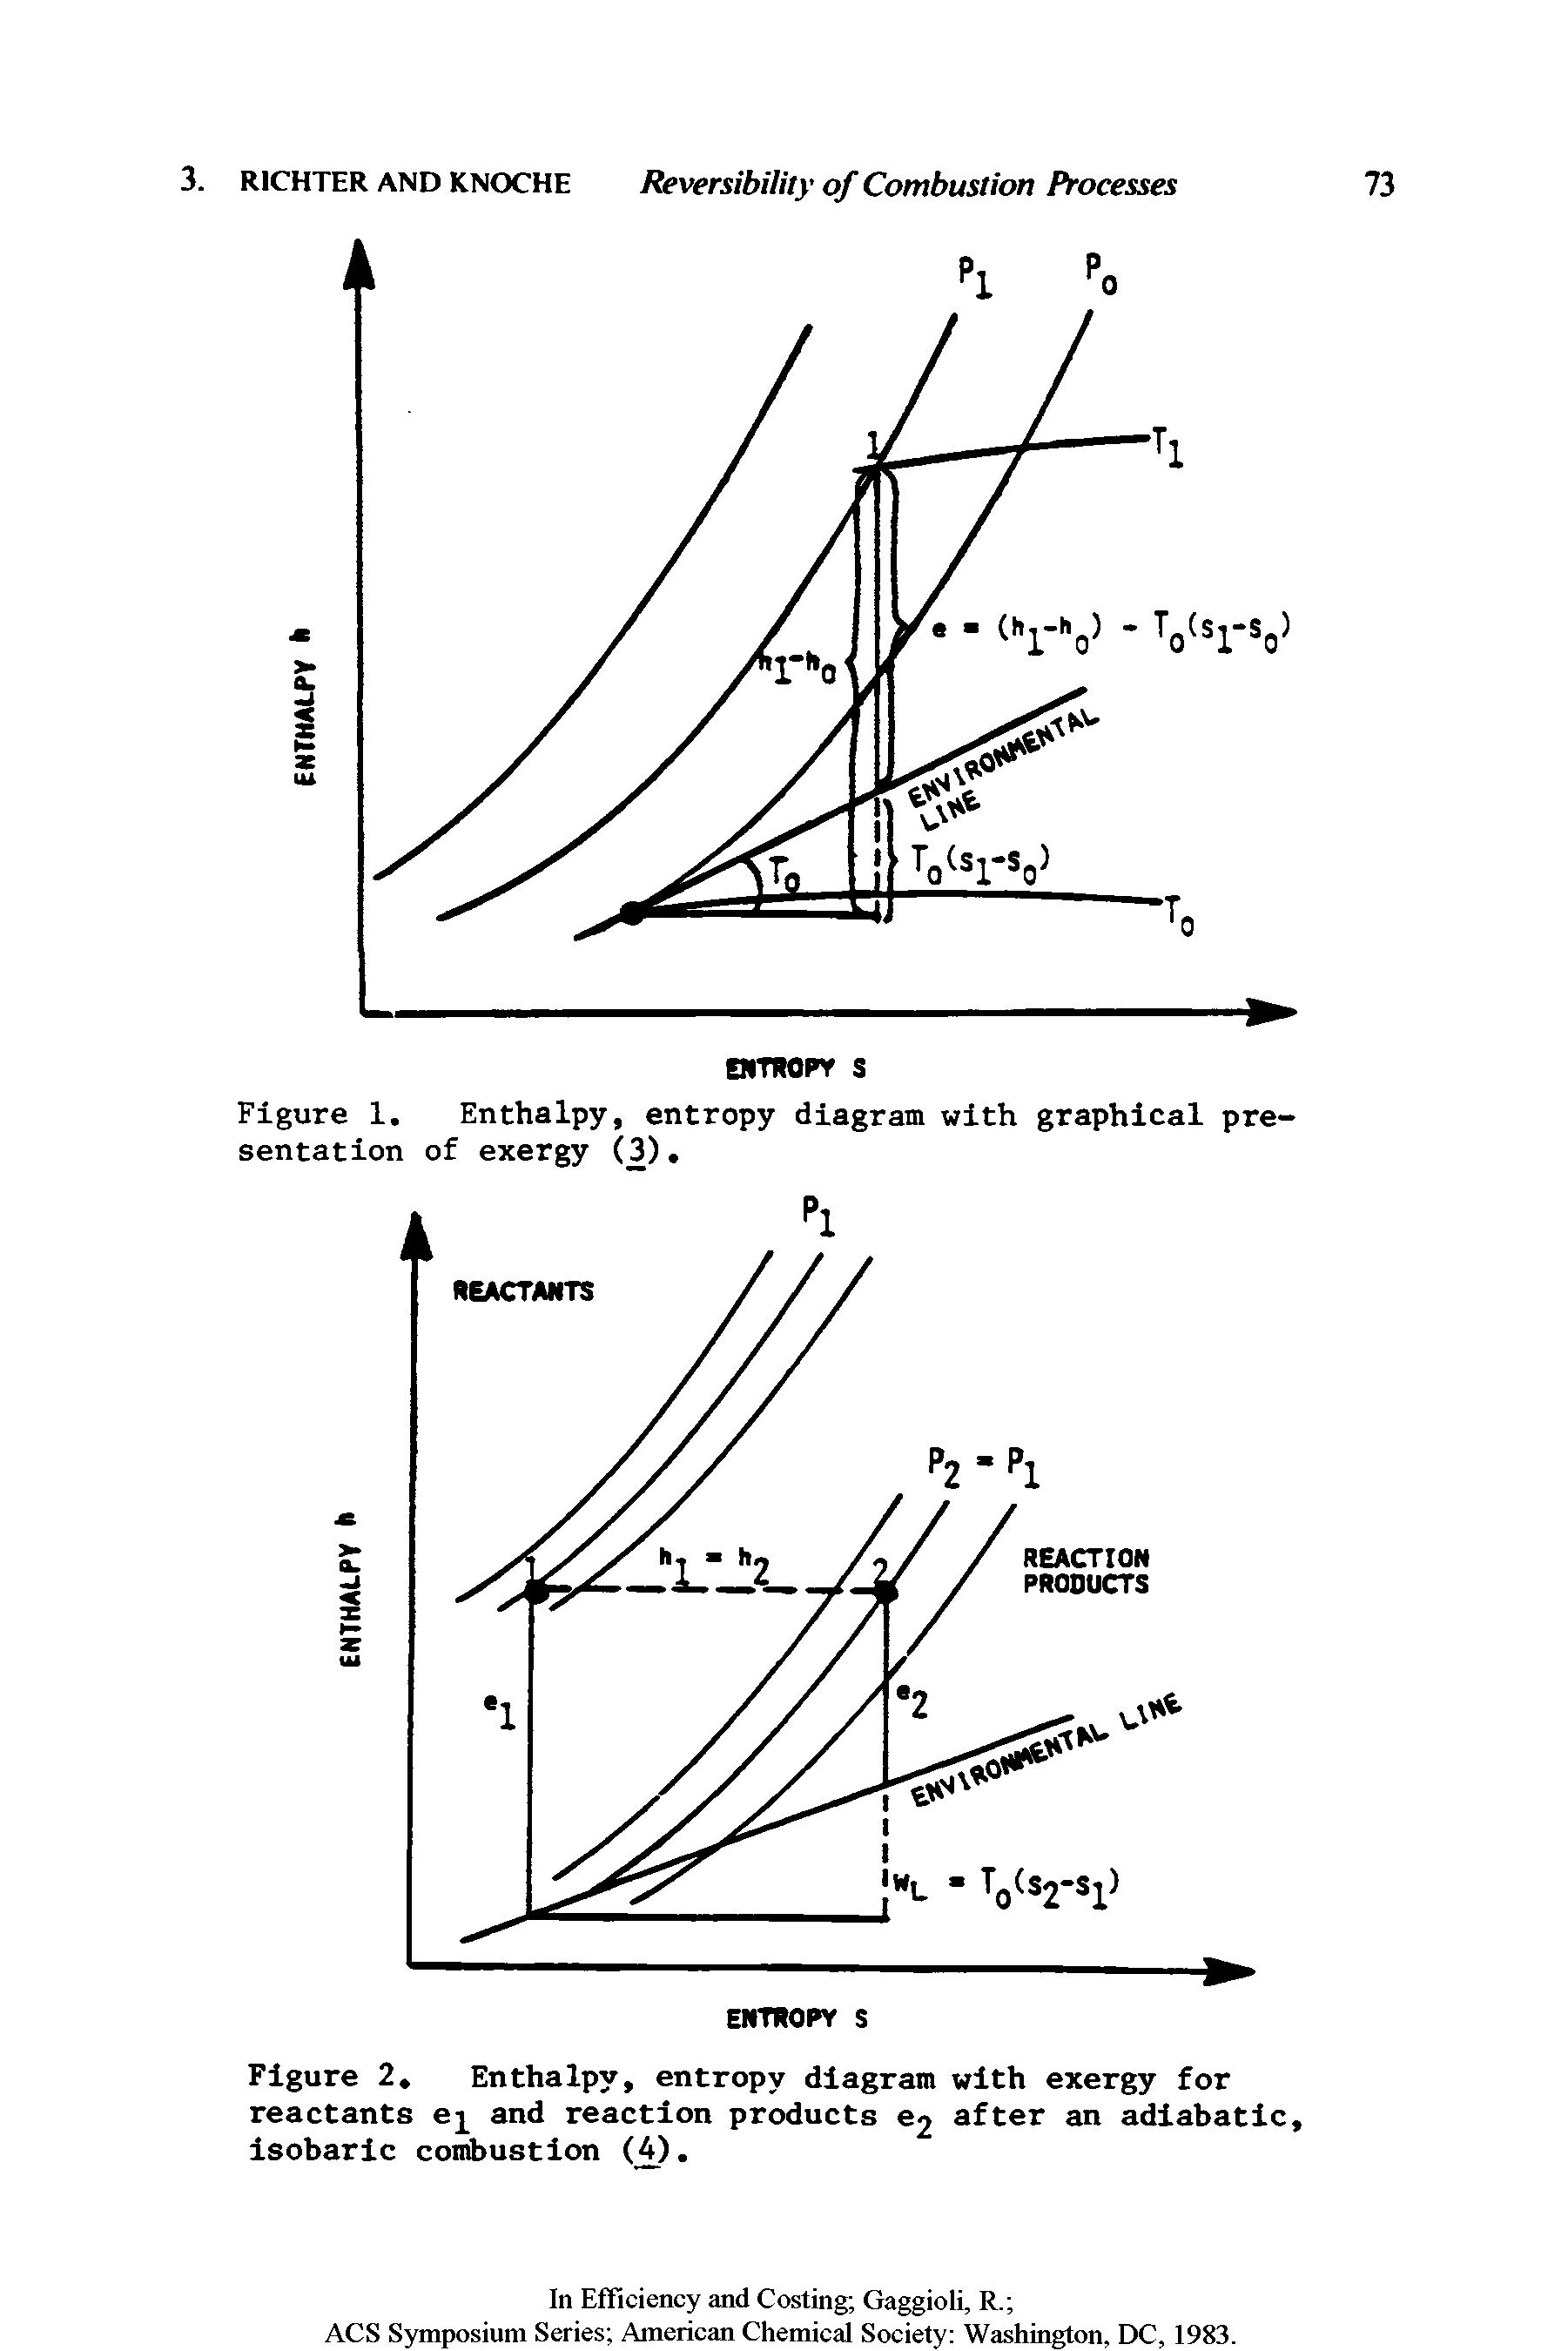 Figure 1. Enthalpy, entropy diagram with graphical presentation of exergy (3).